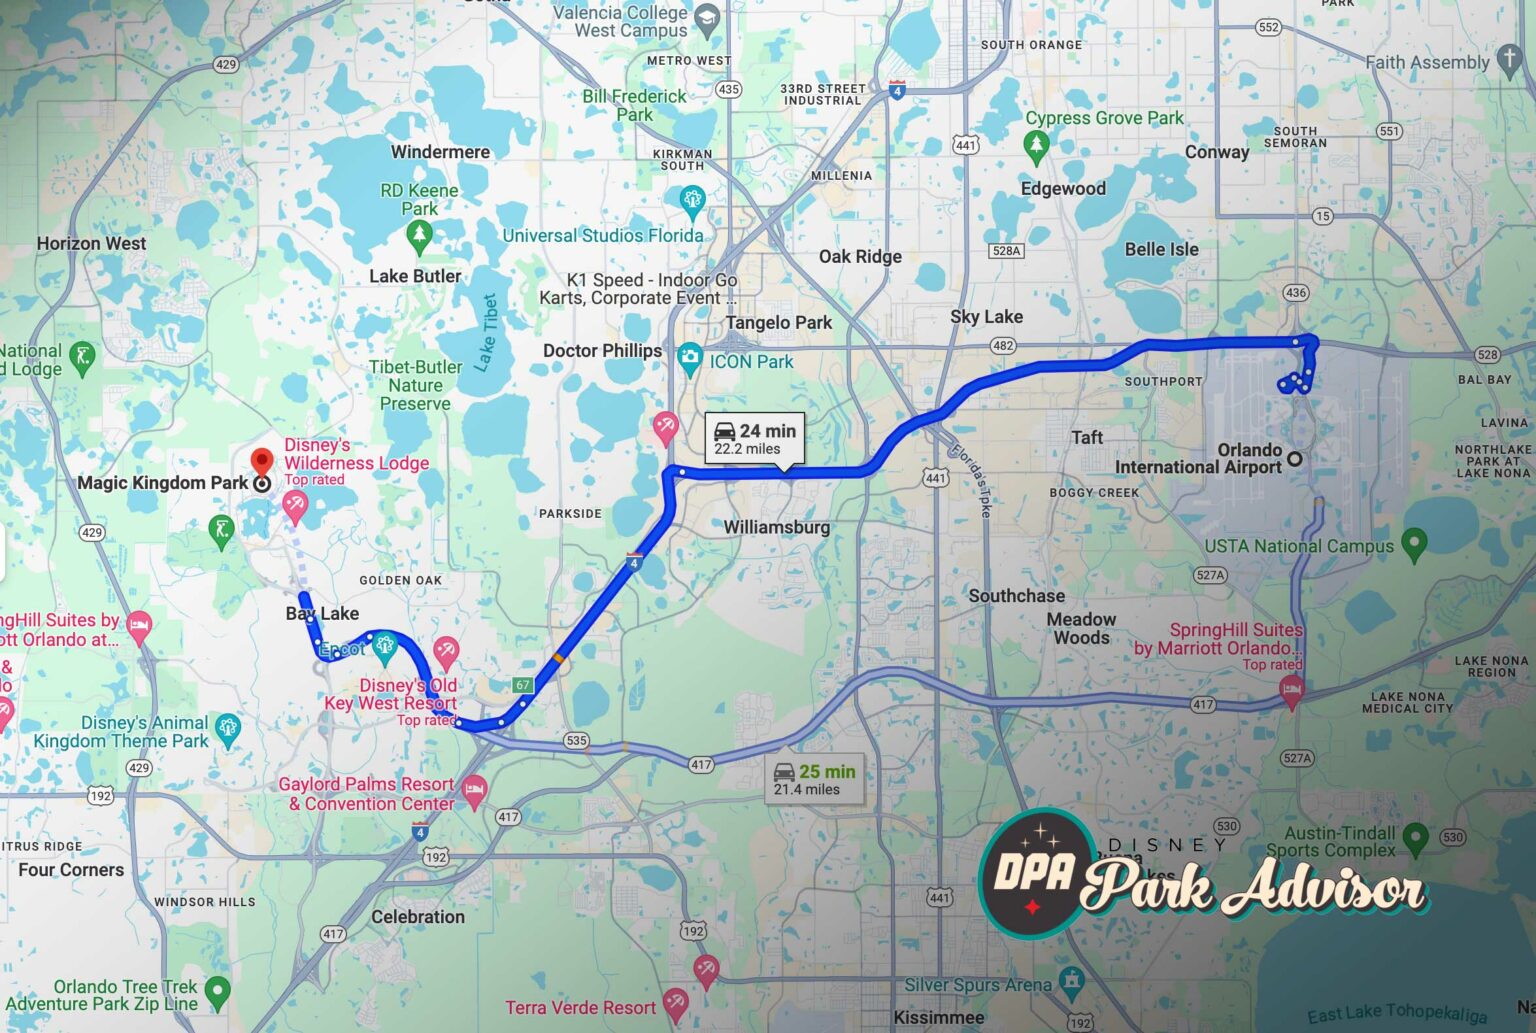 Orlando Airport (MCO) to DIsney World Transit Time Map Overview